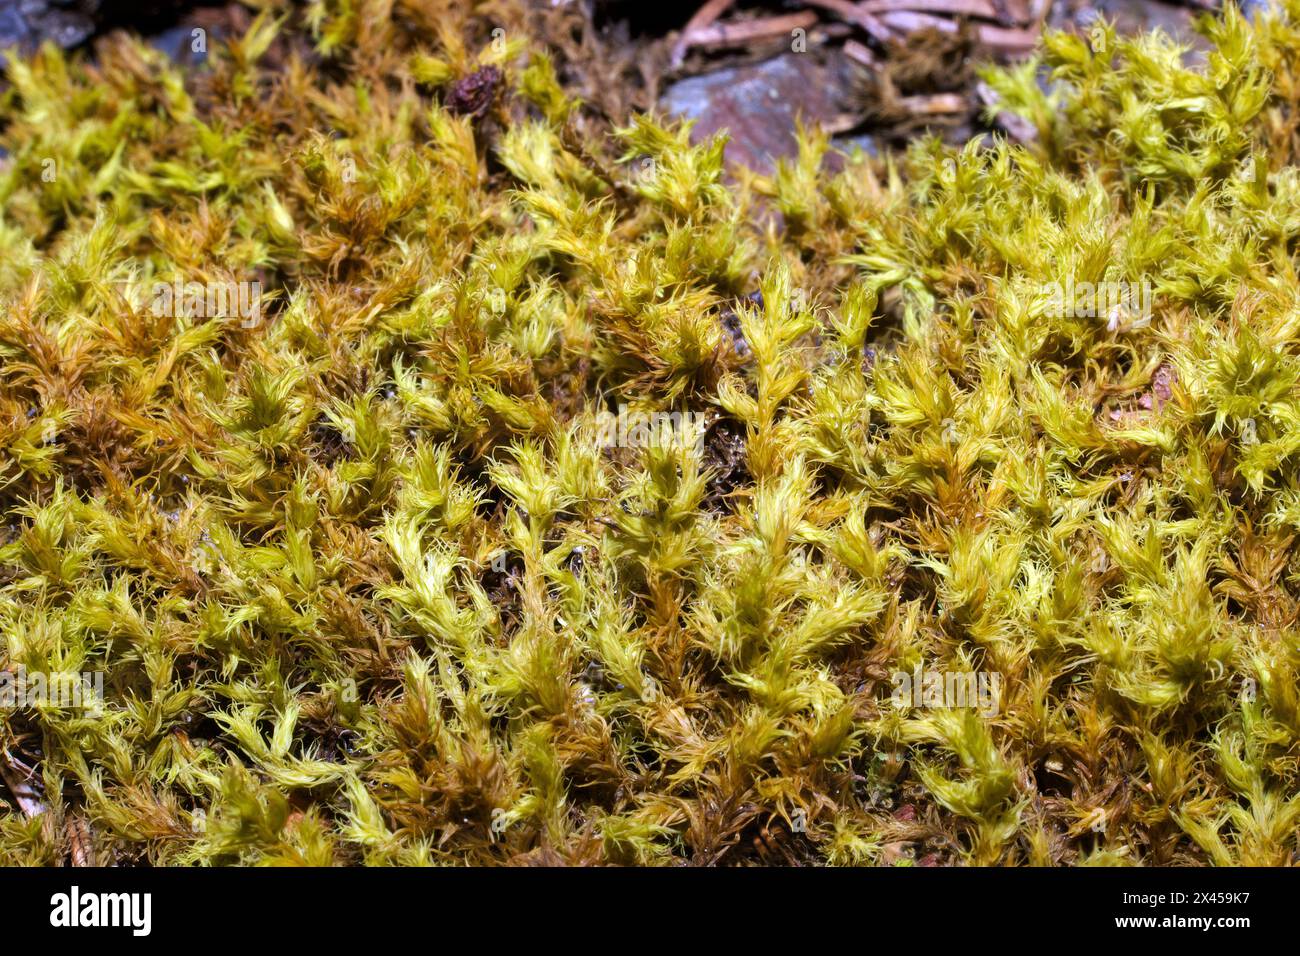 Racomitrium fasciculare (Green Mountain Fringe-moss) can be found on siliceous boulders and drystone walls. Mainly recorded in the Northern Hemisphere. Stock Photo